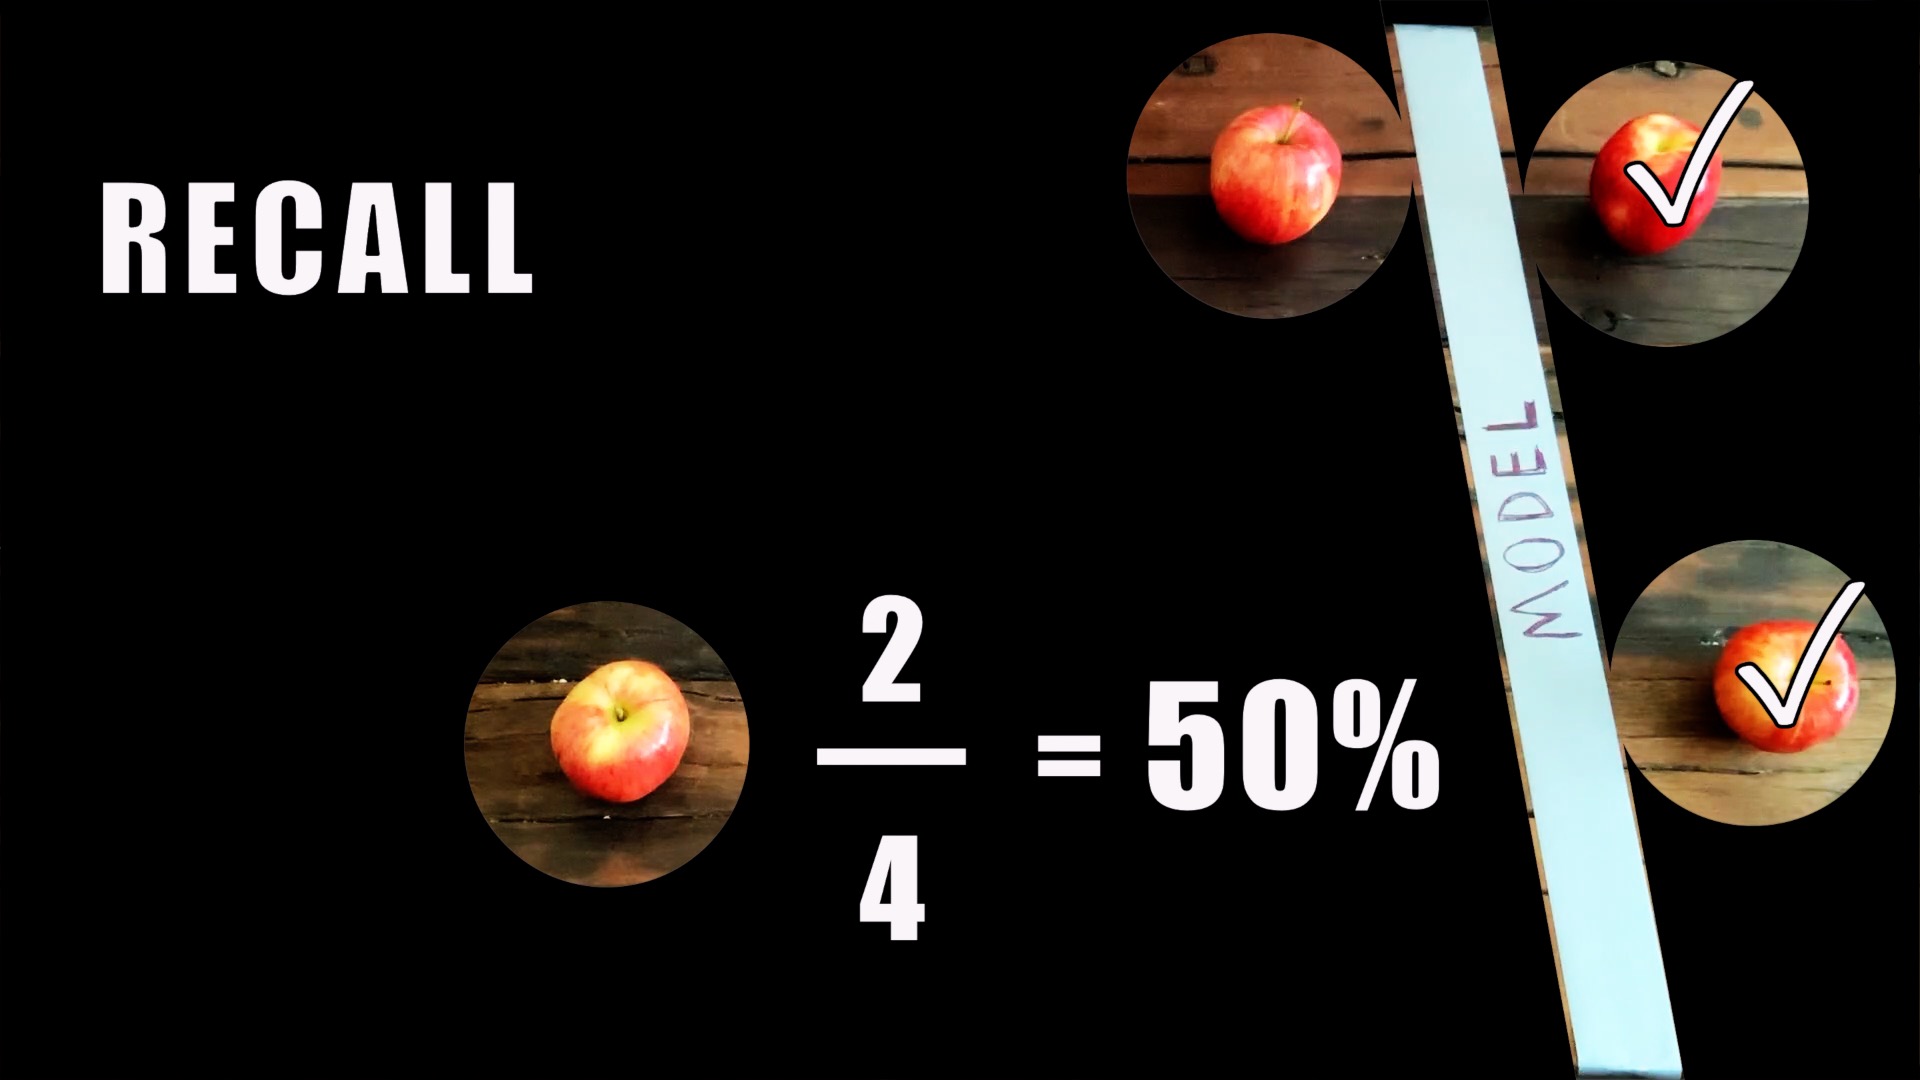 With the decision threshold increased, recall decreased to 50% for the apple class